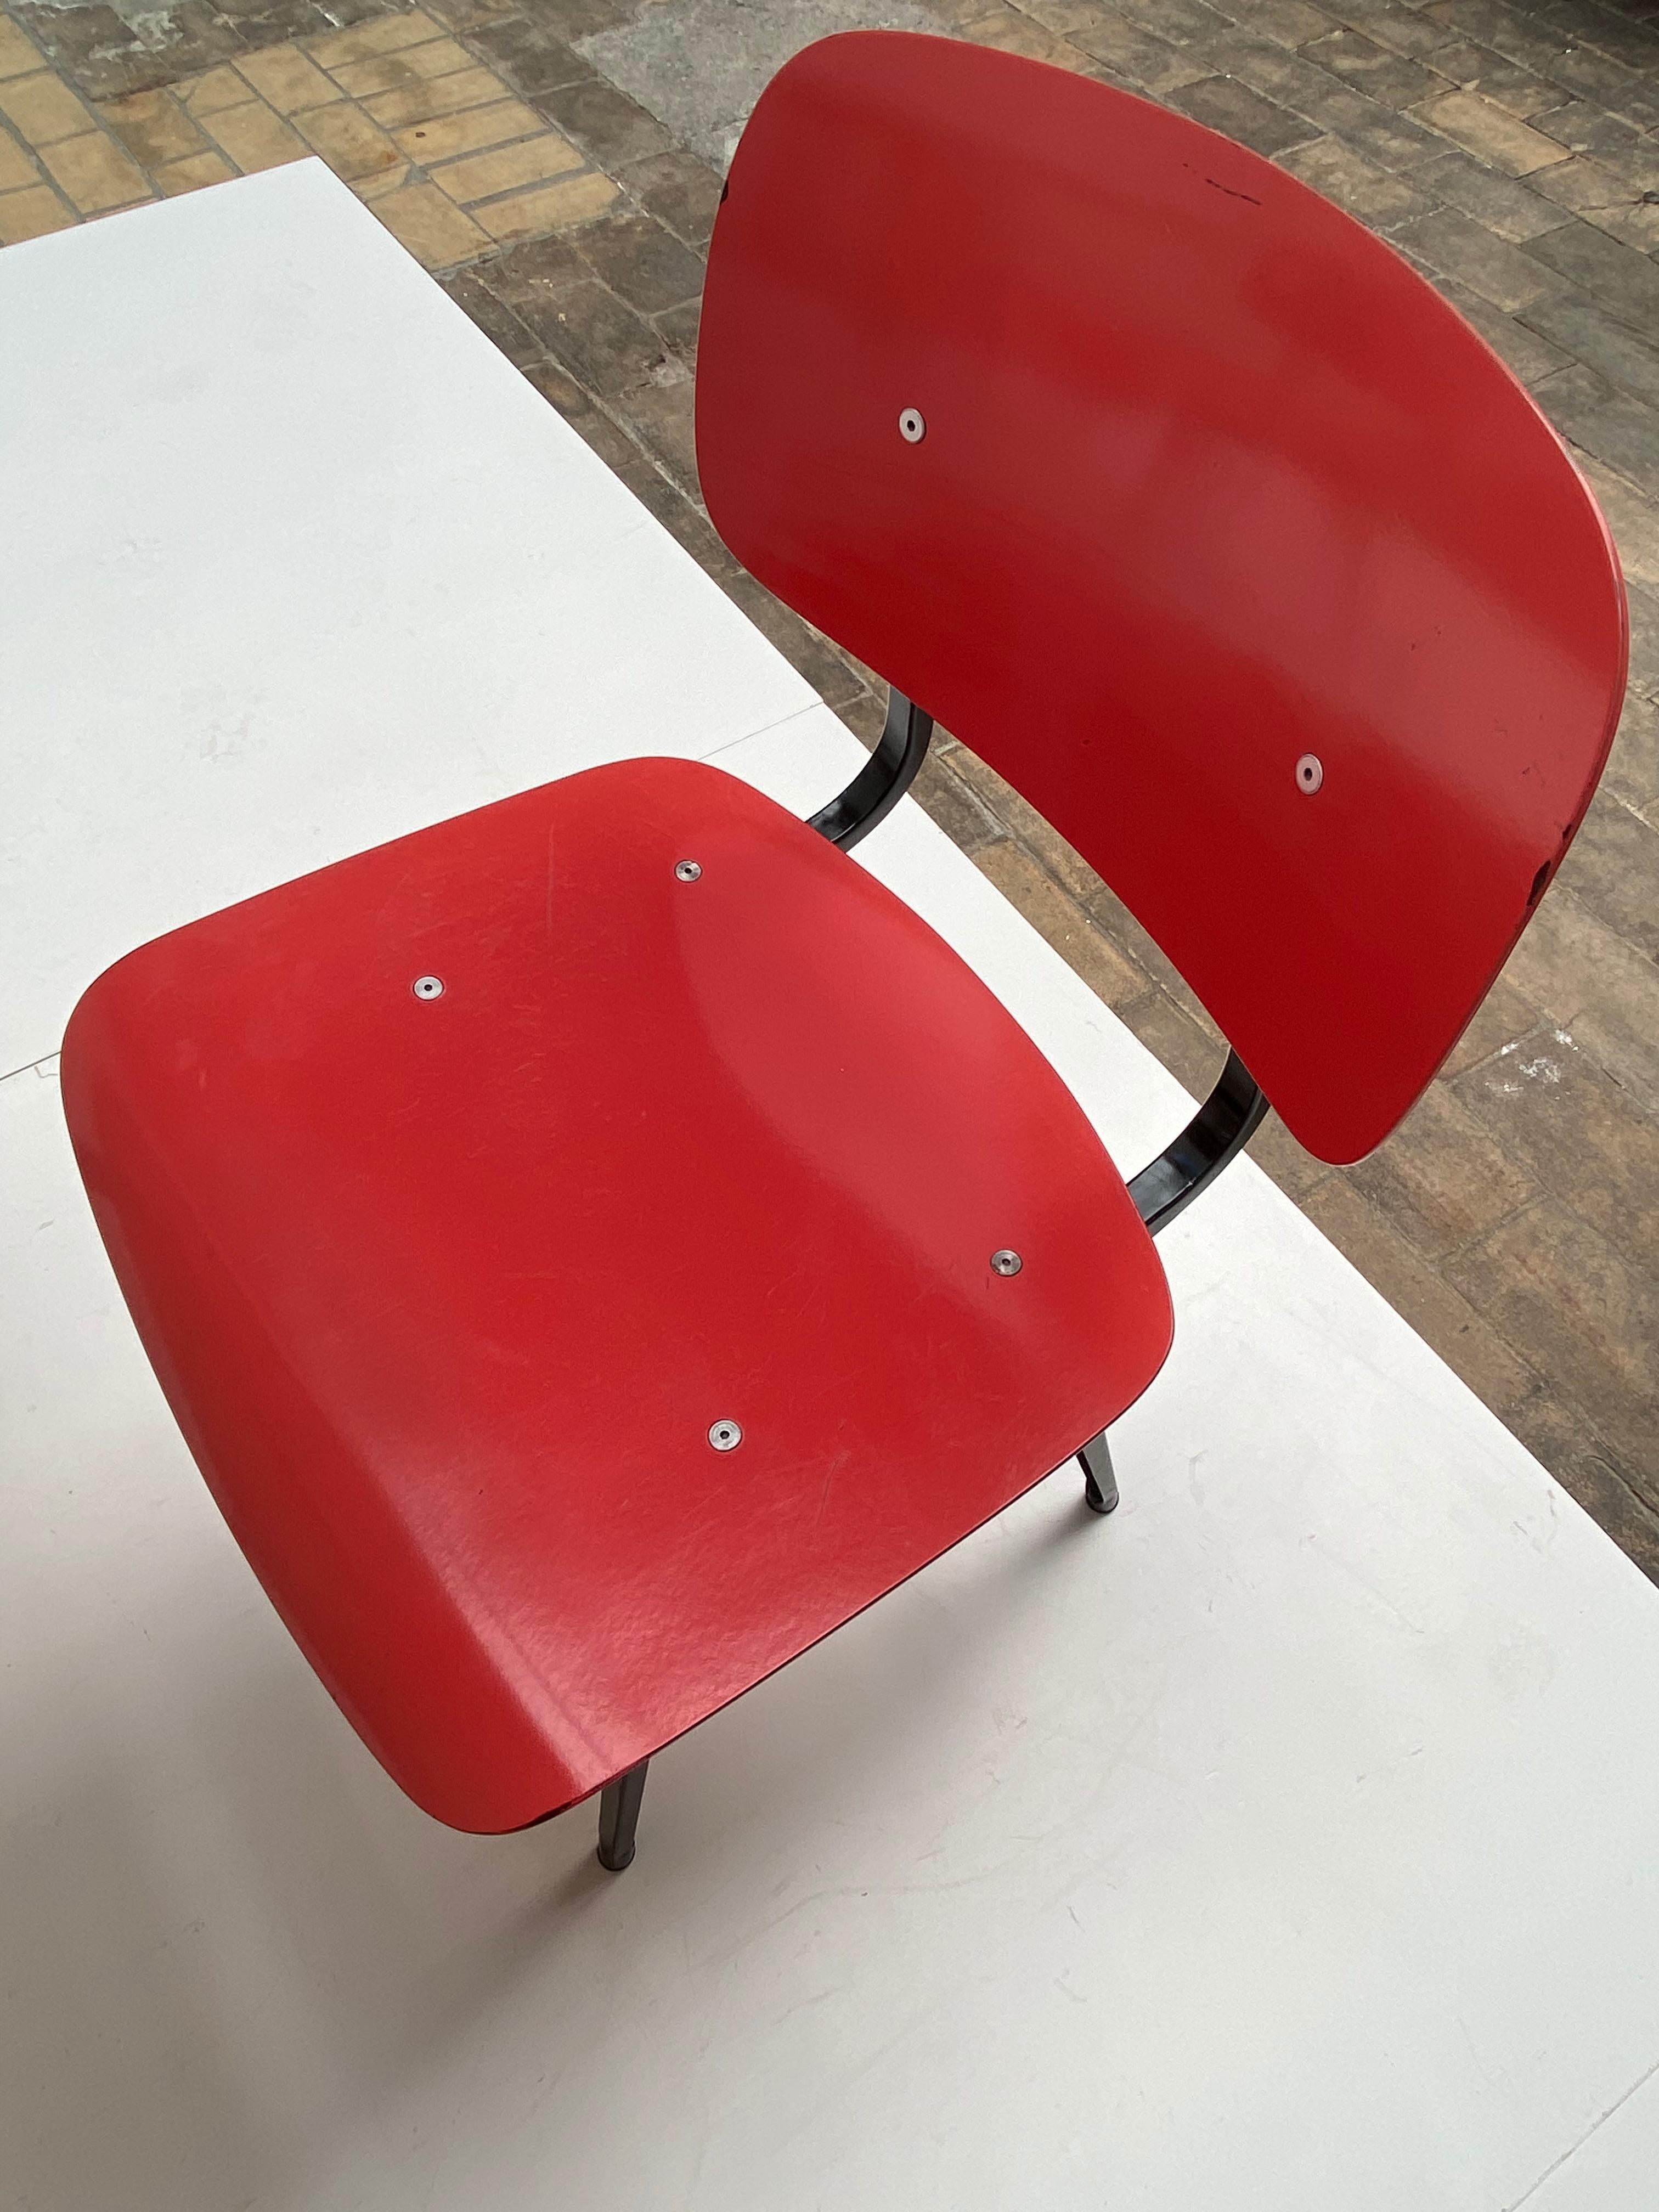 Friso Kramer Early Edition Revolt Chairs + Rare Matching Round Reform Table 1953 12